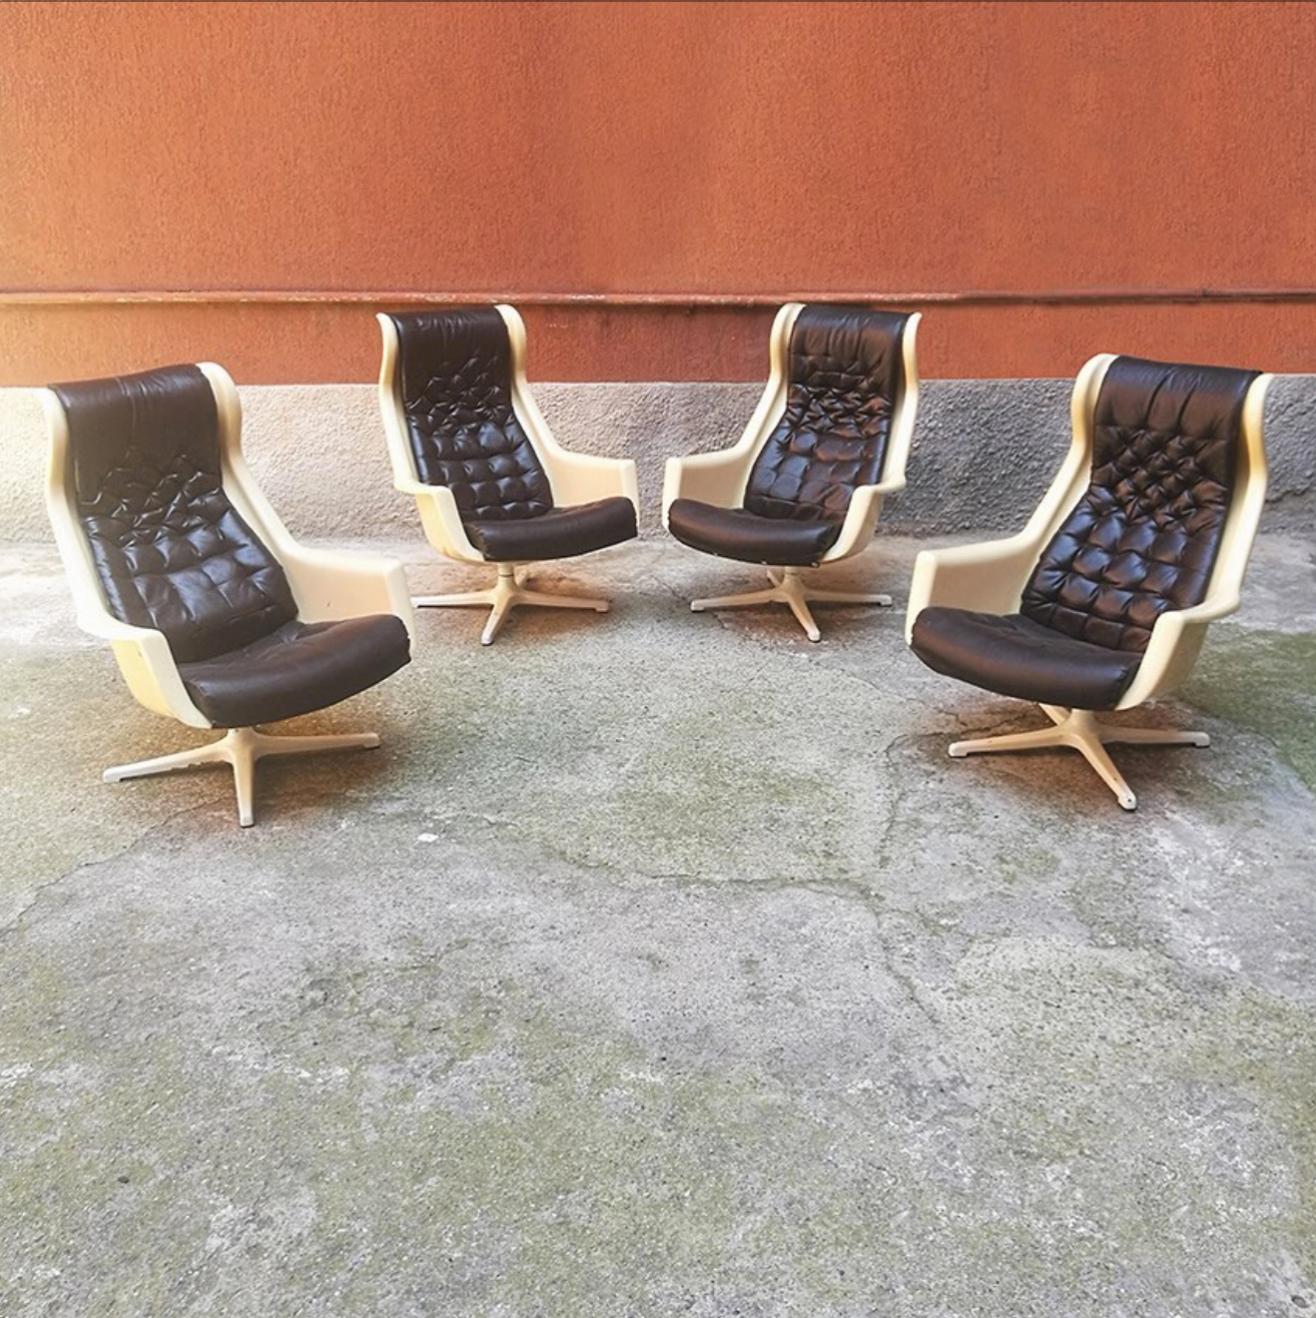 Swedes mid-century modern space age armchairs Galaxy Alf Svensonn for Dux, 1968
Amazing and very rare set of 4 Space Age armchairs from 1968 period.
The seating is in leather and the cover is in plastic white.
Base is in aluminum fusion, white